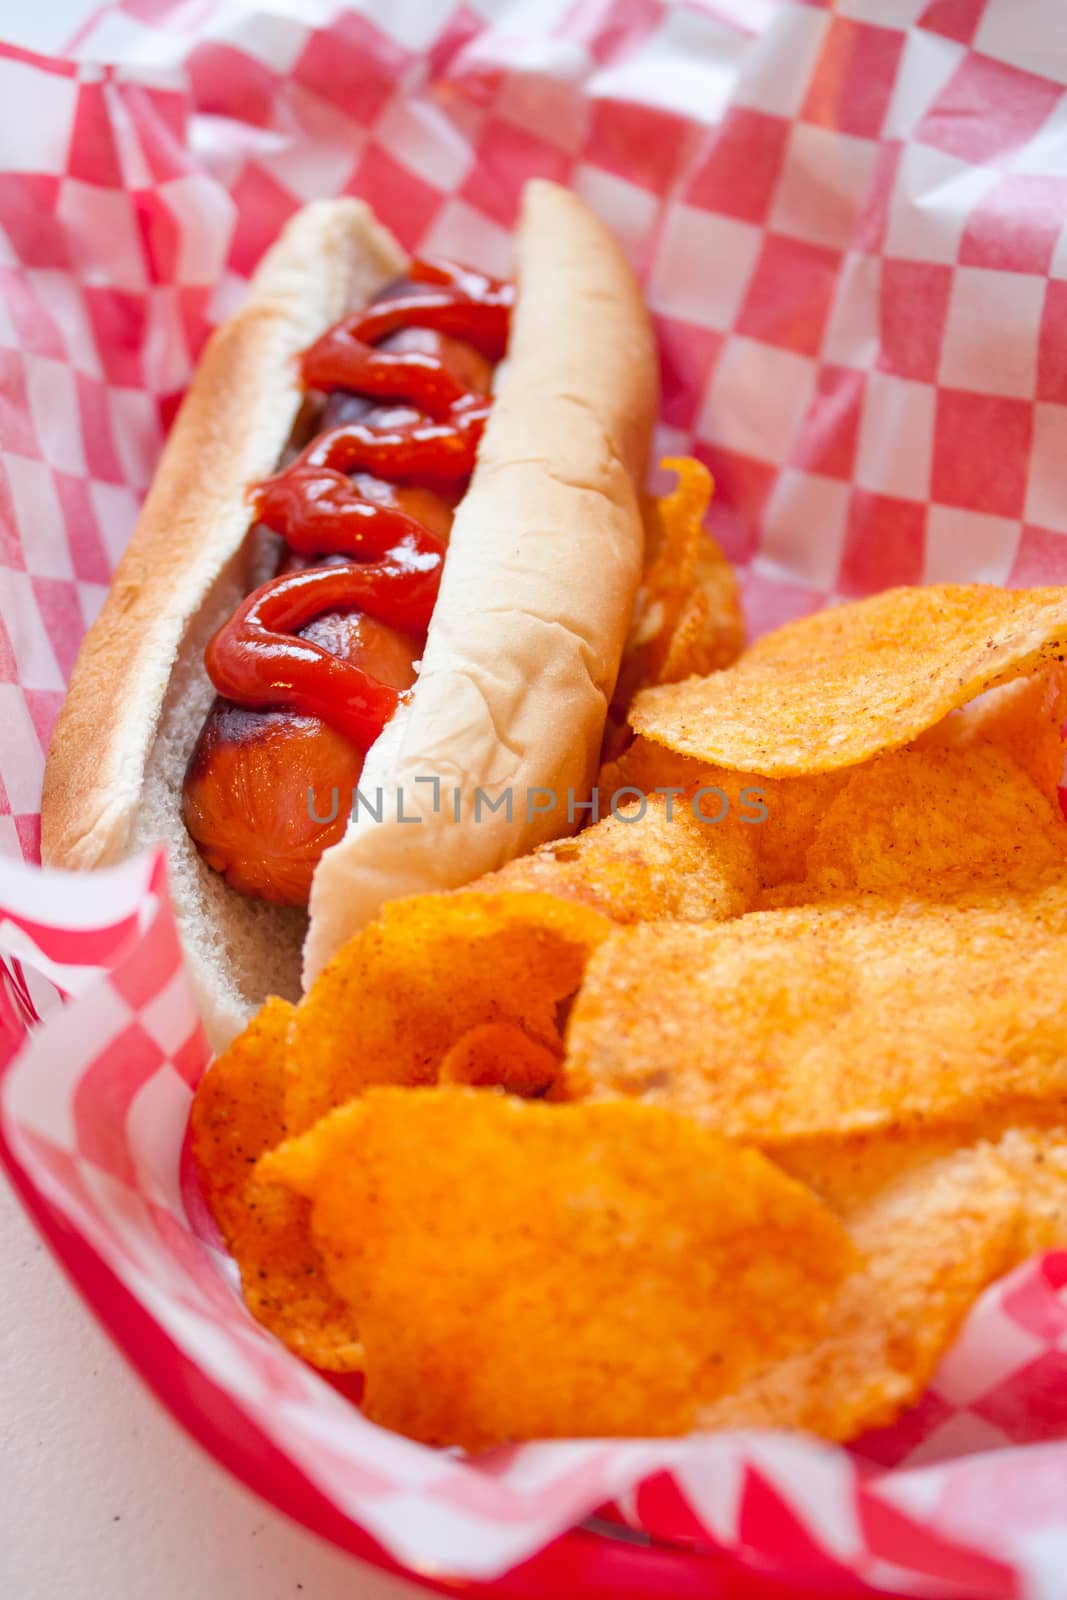 Grilled Hot Dog by SouthernLightStudios